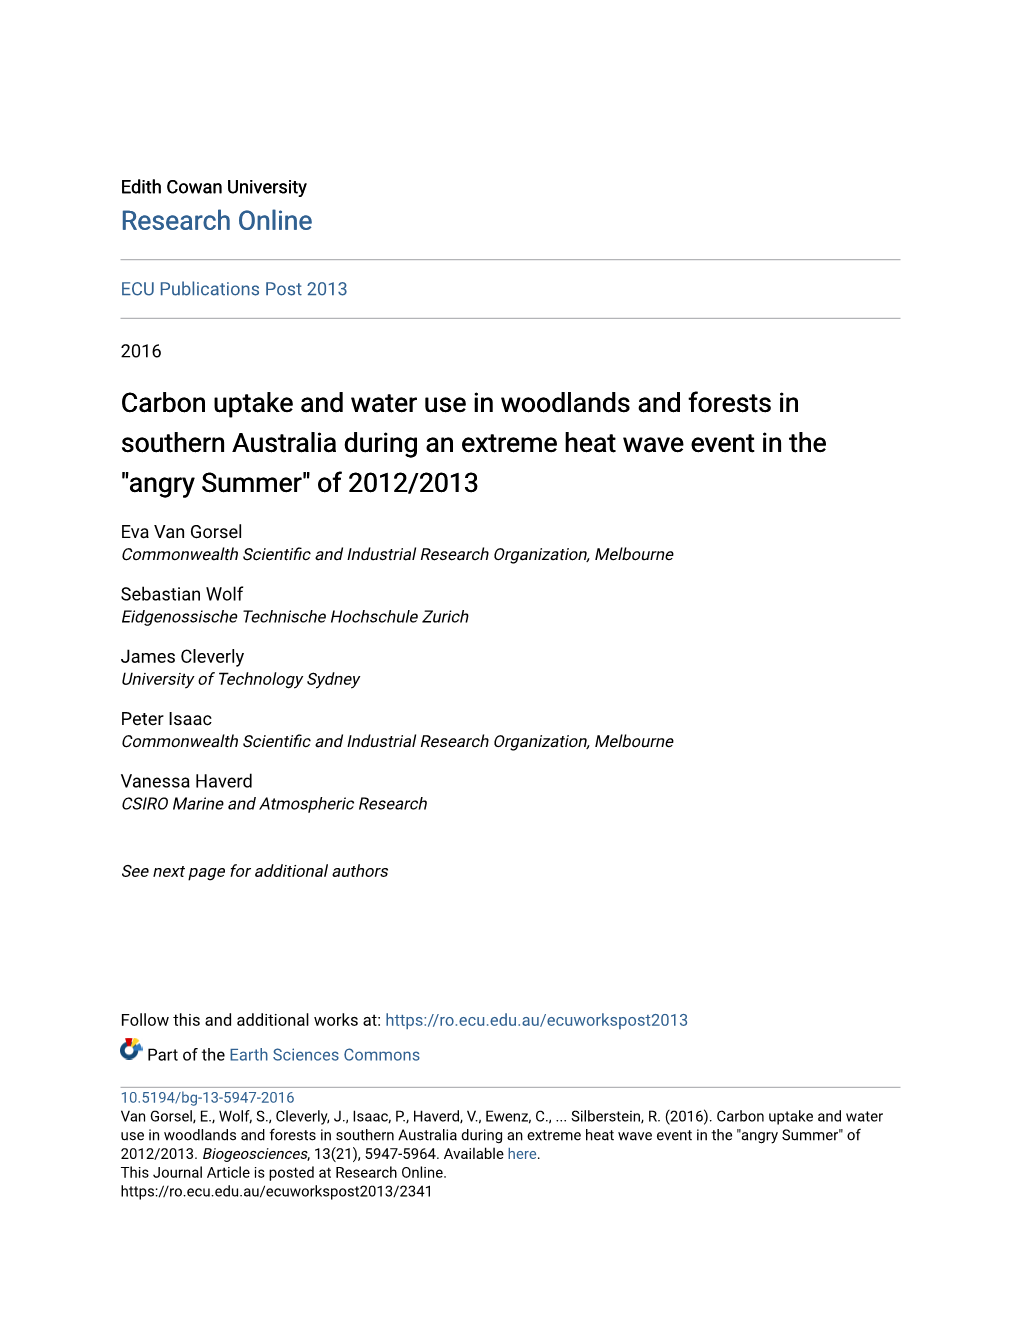 Carbon Uptake and Water Use in Woodlands and Forests in Southern Australia During an Extreme Heat Wave Event in the "Angry Summer" of 2012/2013